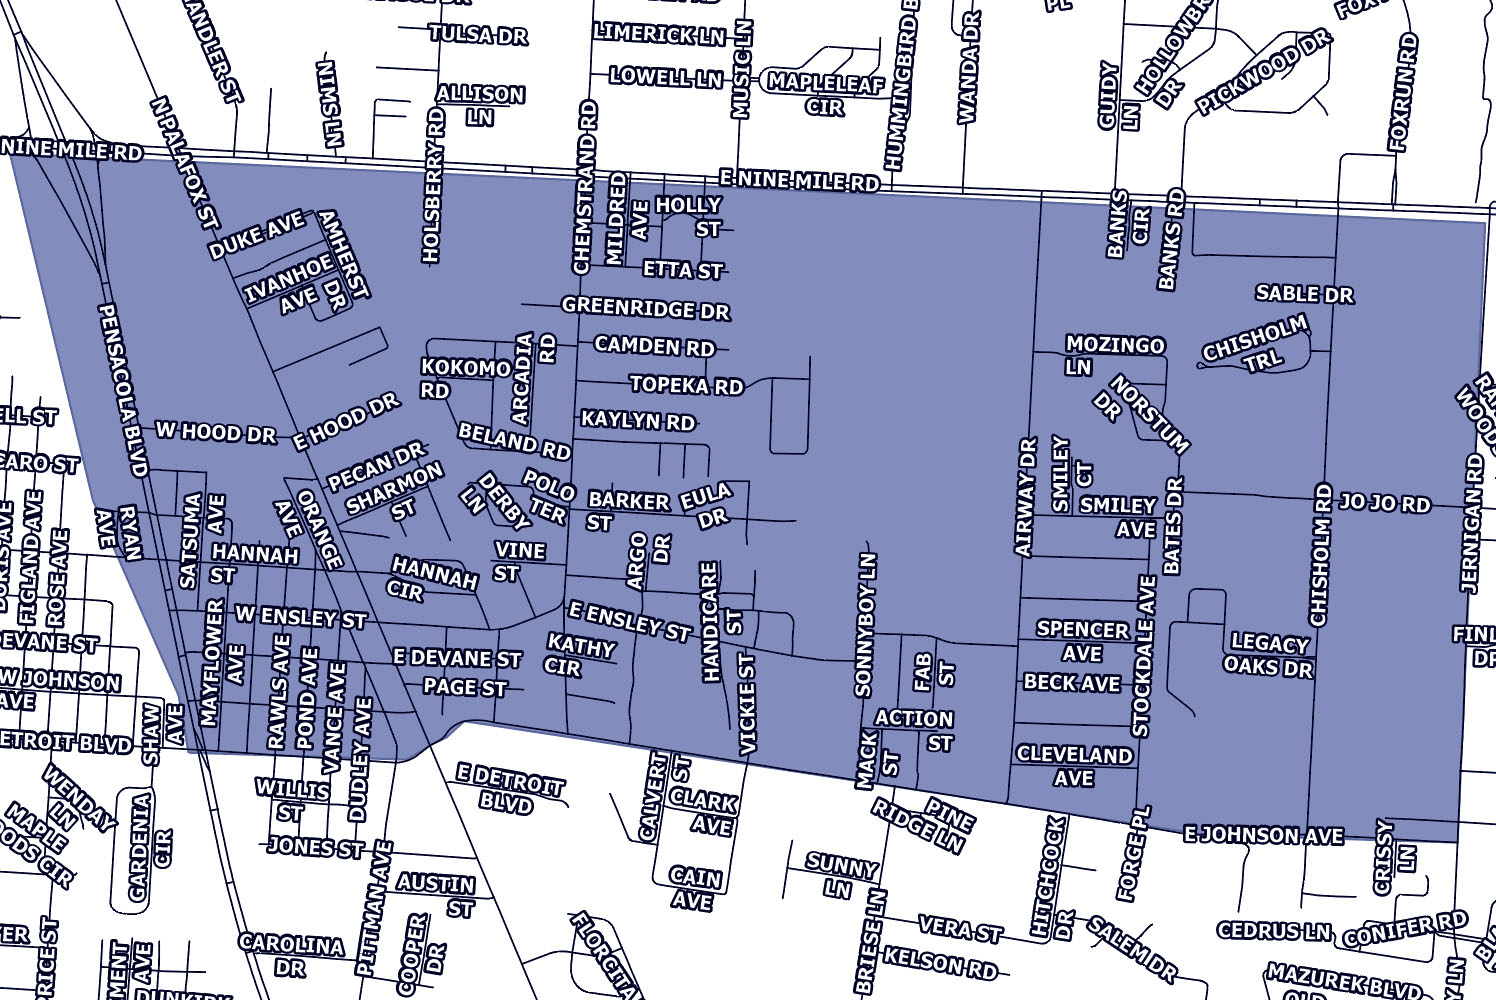 District 3 Ensley North Neighborhood Cleanup Map